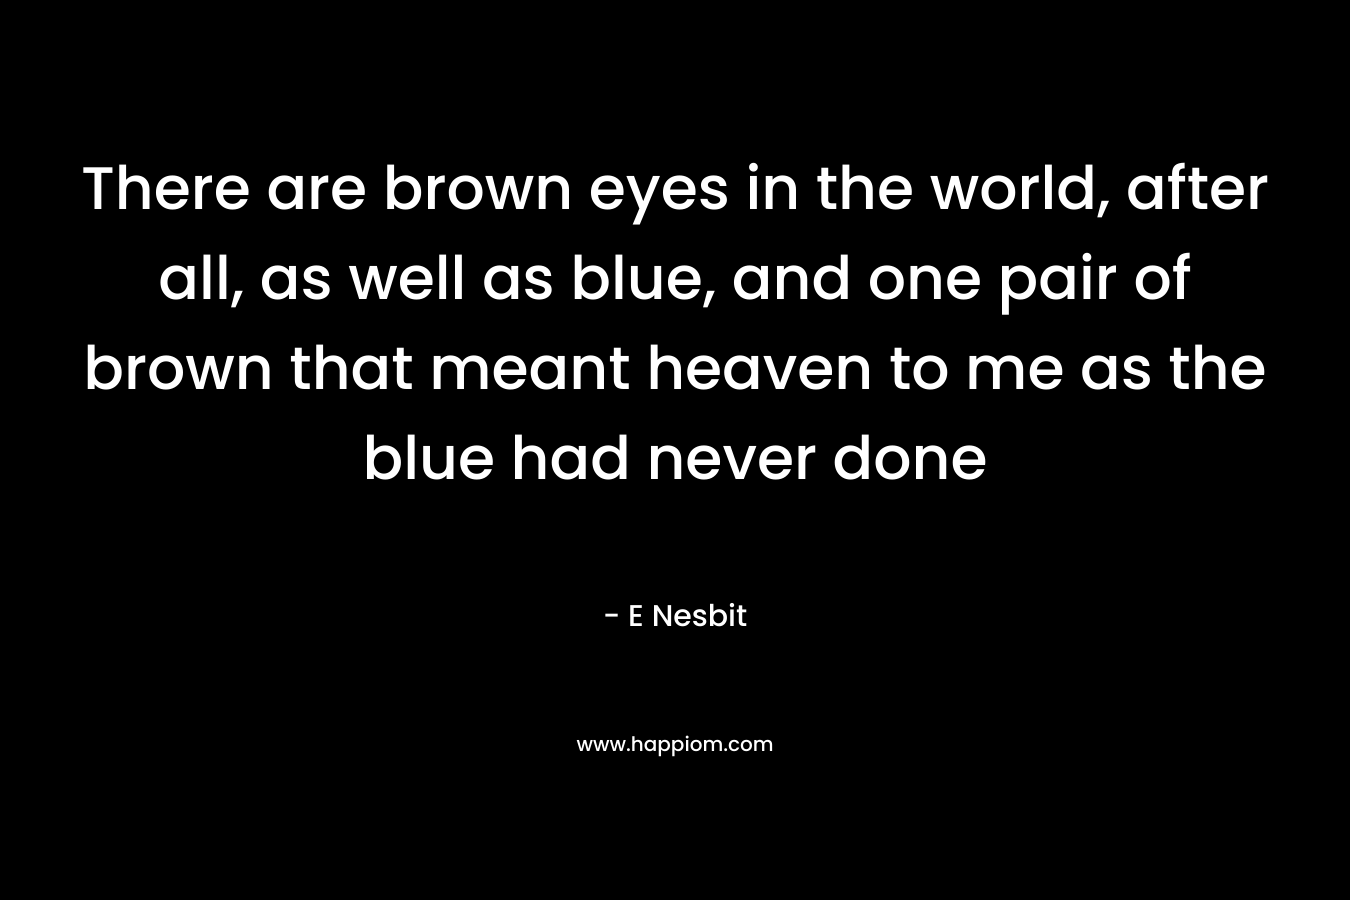 There are brown eyes in the world, after all, as well as blue, and one pair of brown that meant heaven to me as the blue had never done